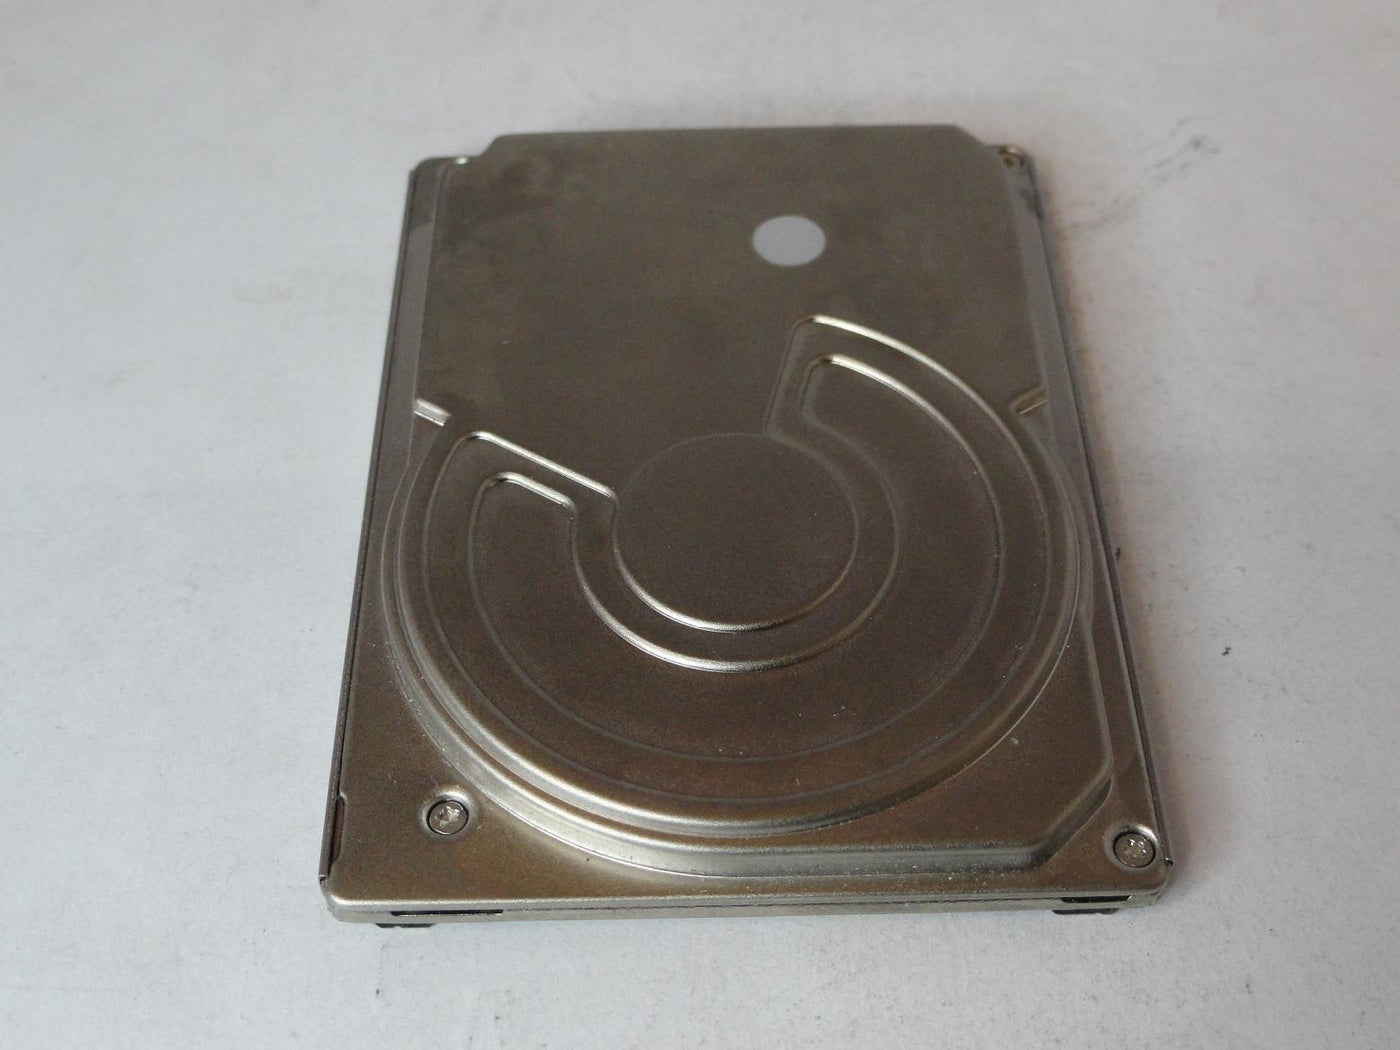 PR23009_HDD1724_Toshiba HP 60Gb ZIF 4200rpm 1.8in HDD - Image2